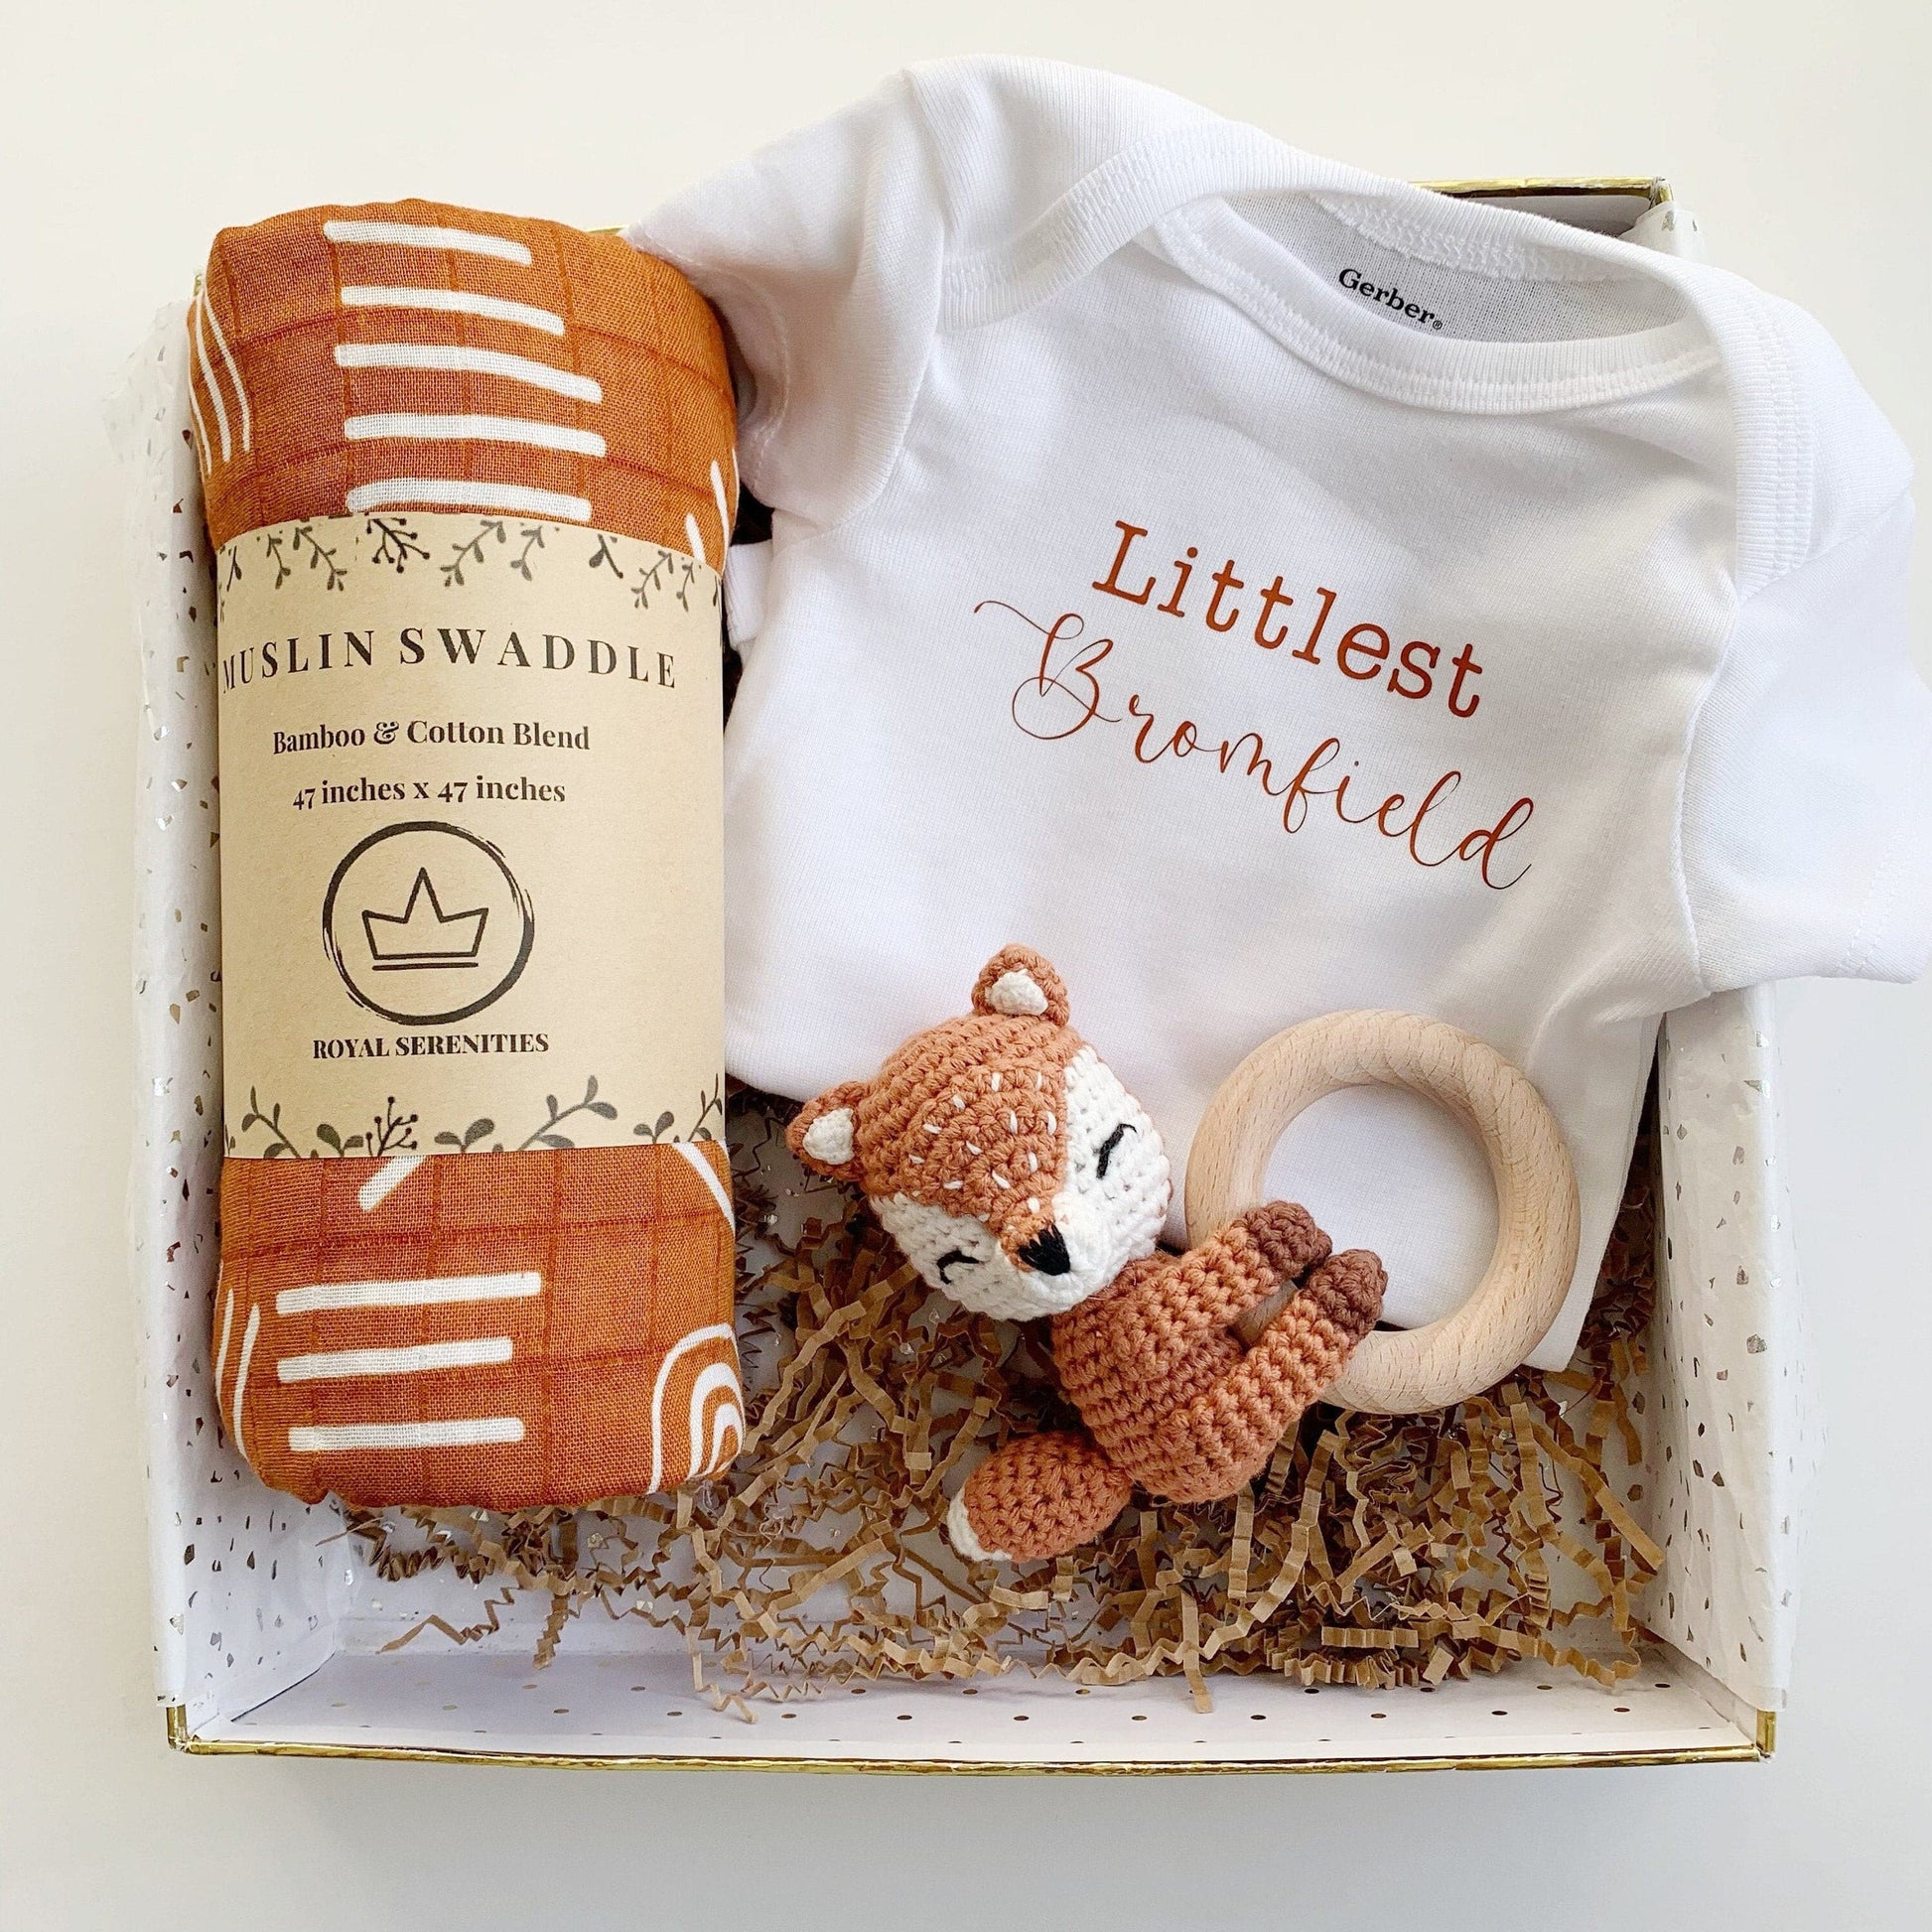 51 Best Baby Shower Gift Ideas for the New Baby